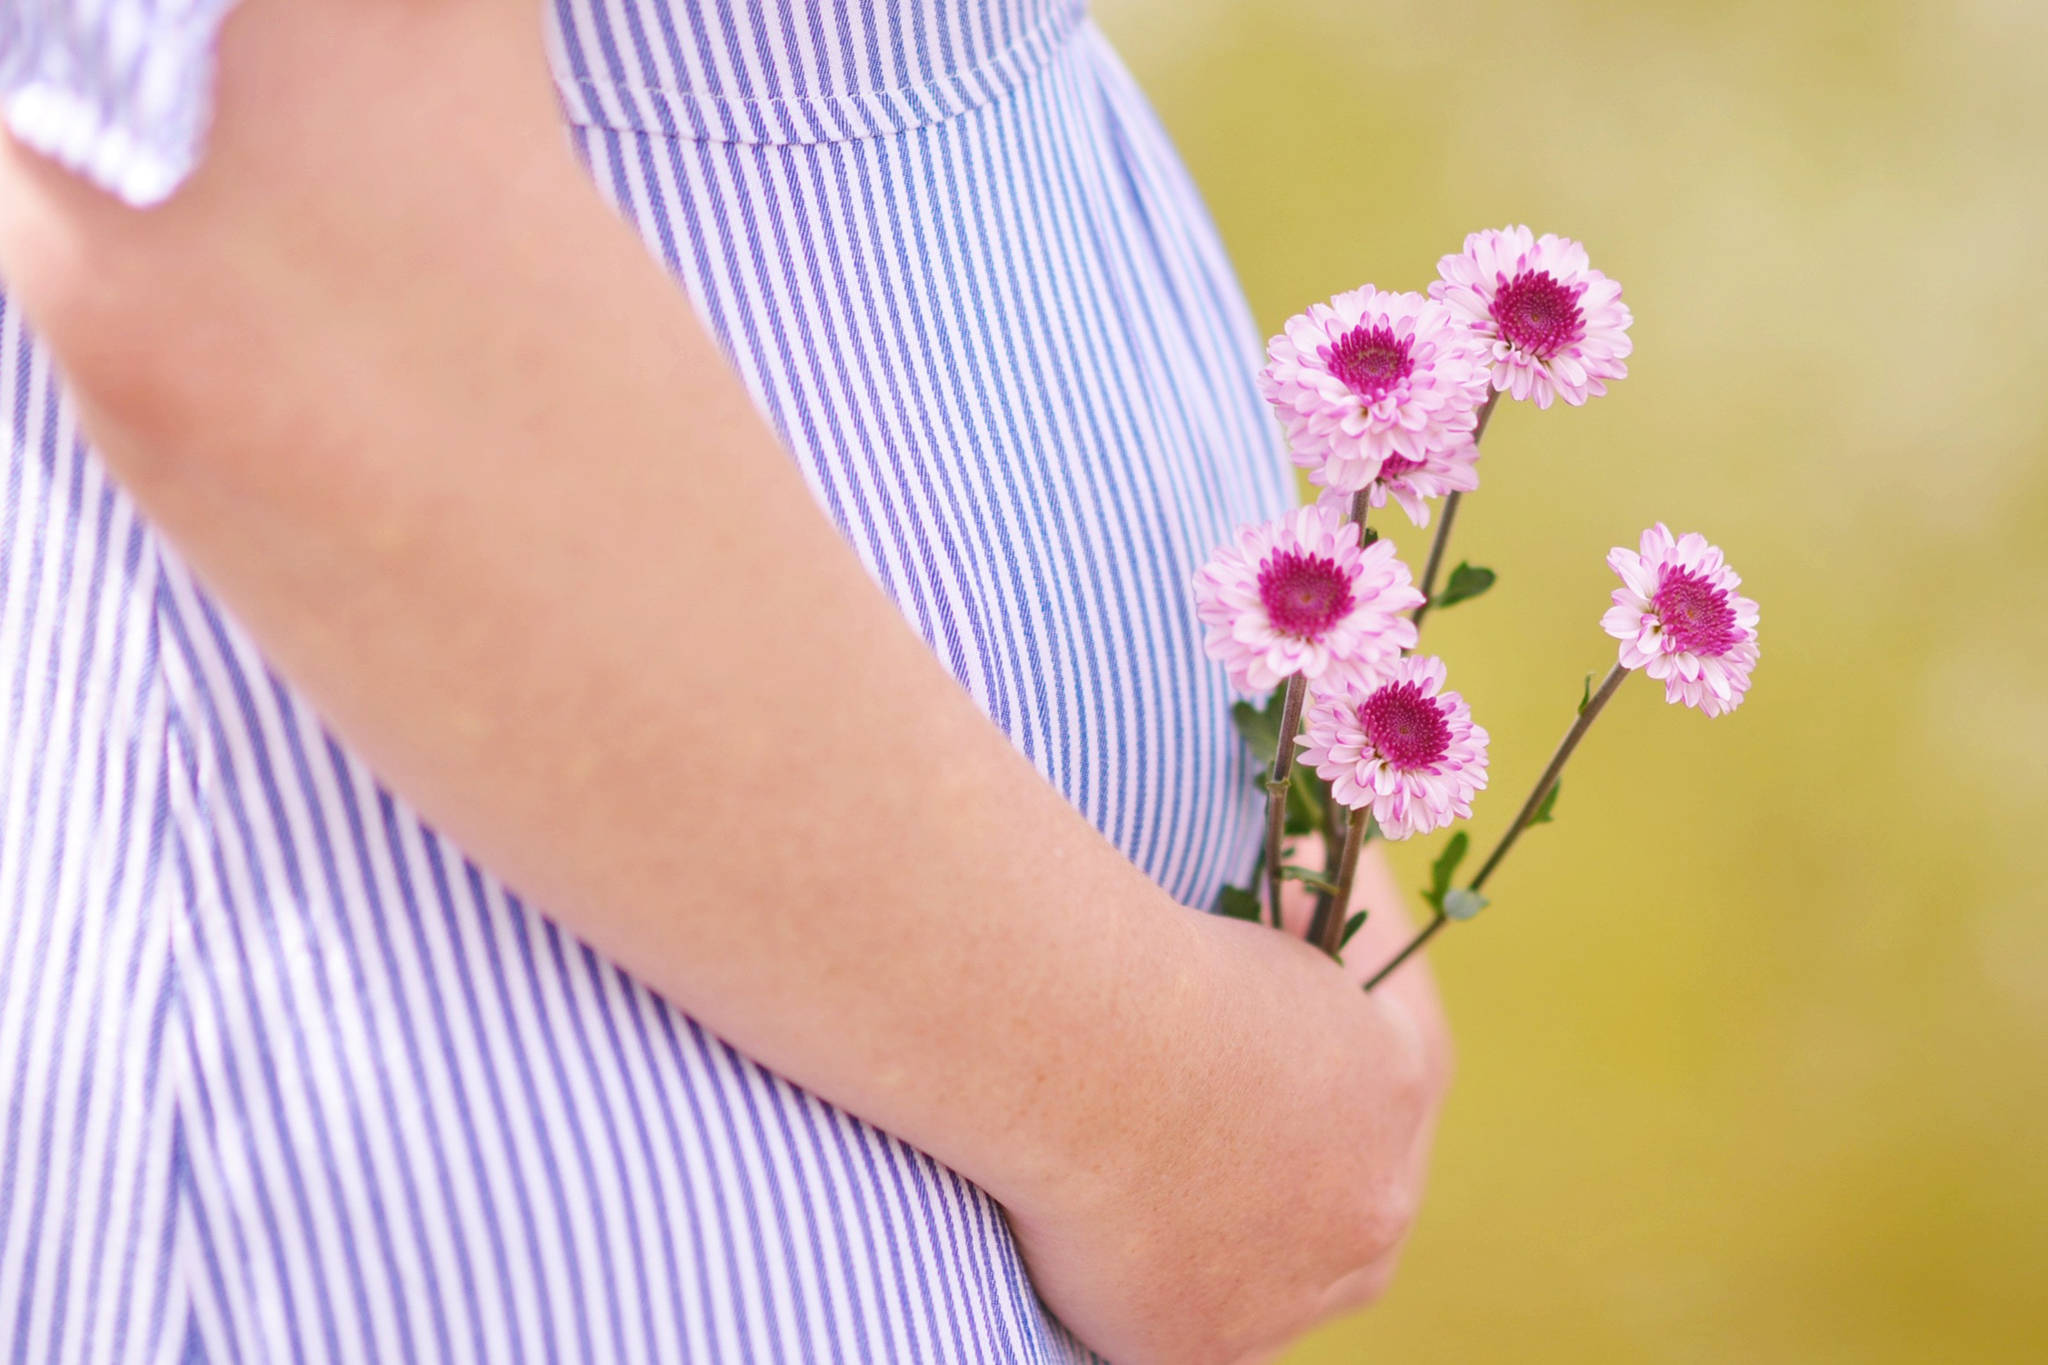 Juneau Family Health and Birth Center will provide a free early pregnancy class Tuesday evening. (Unsplash | Ashton Mullins)